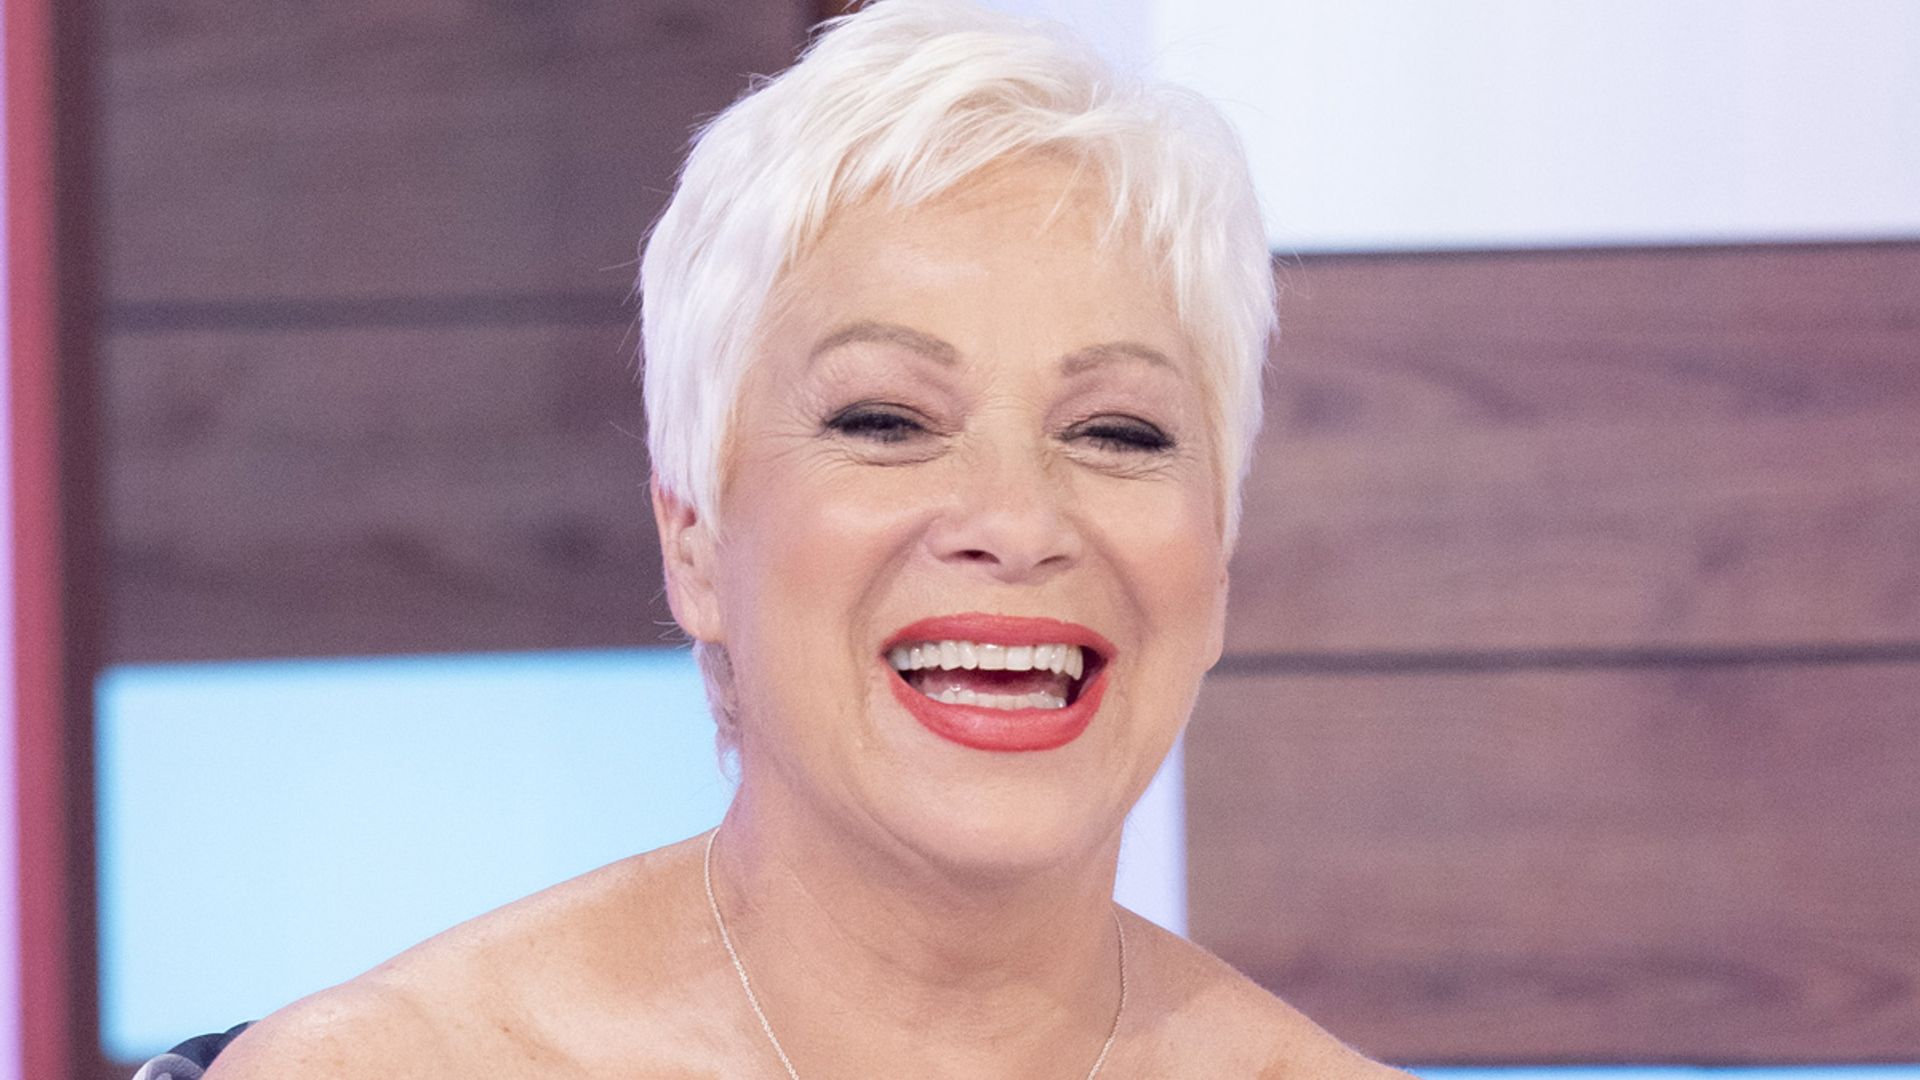 denise welch swimsuit